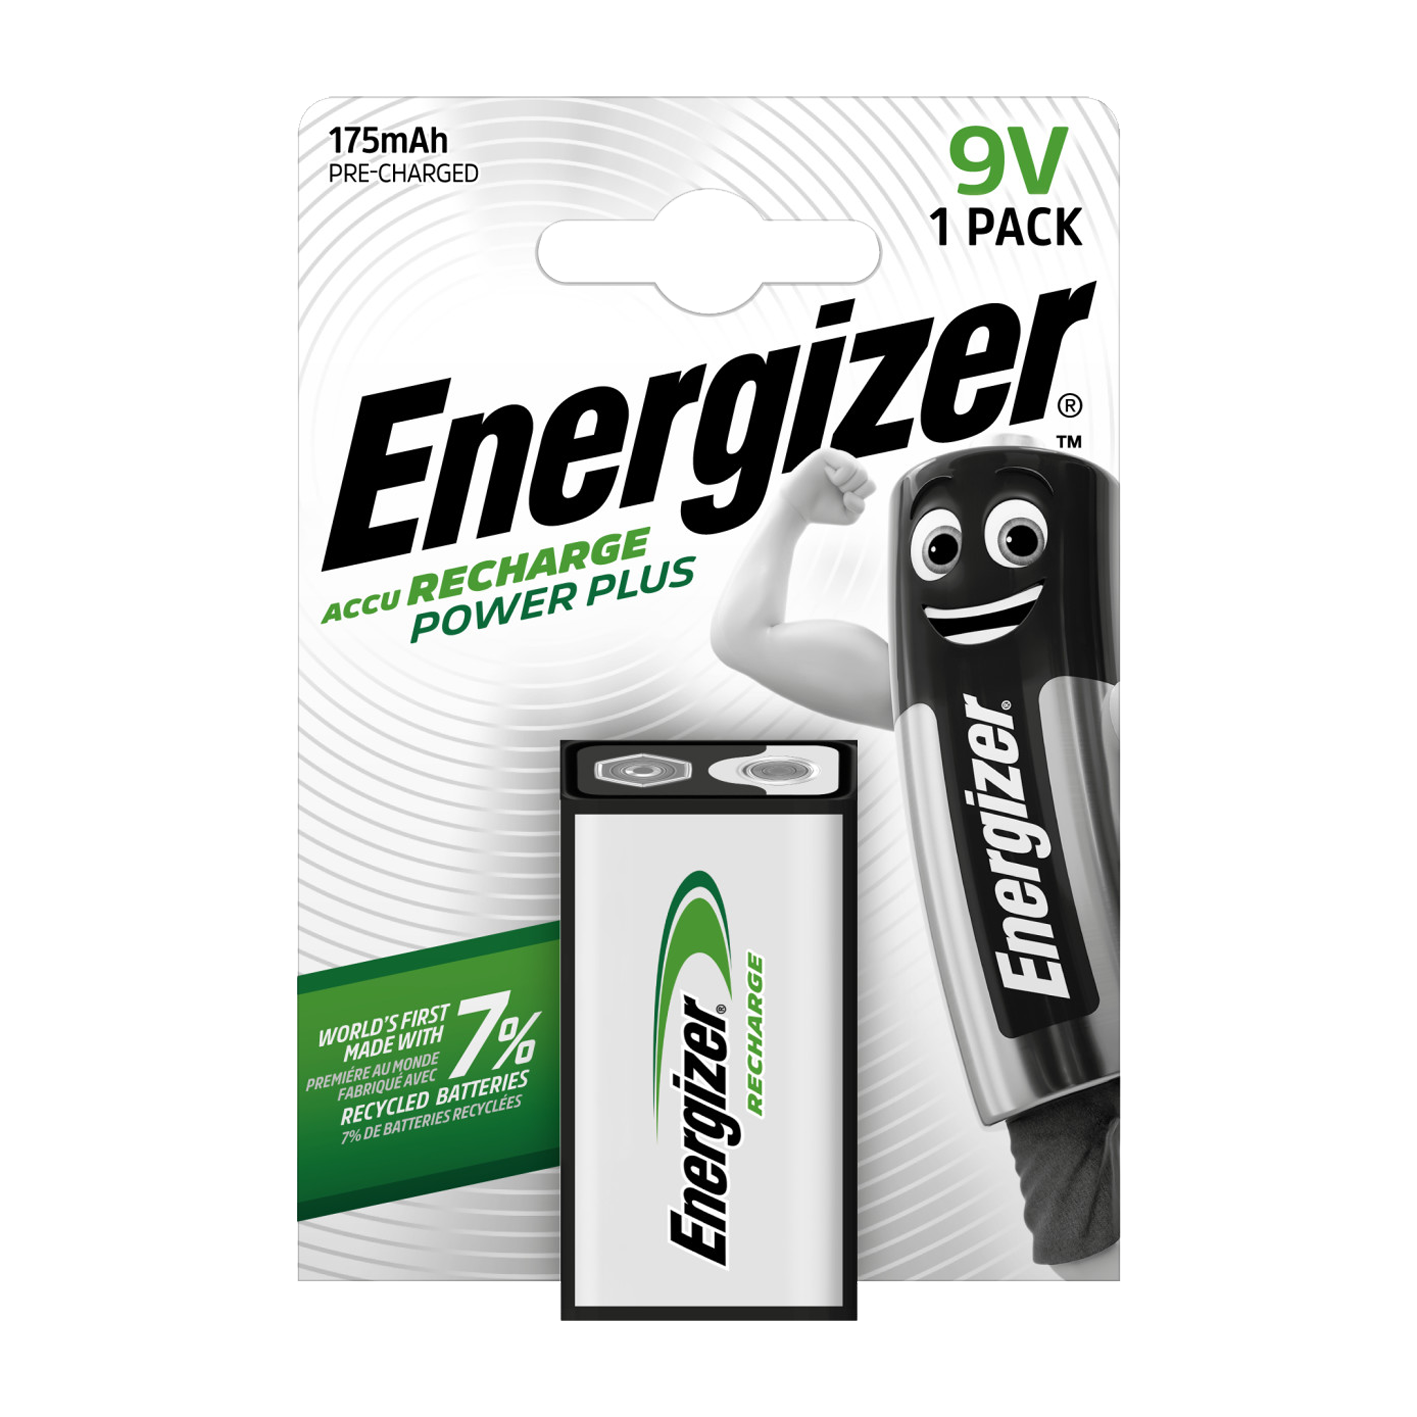 Energizer® 9V 175mAh Recharge Power Plus, Pack of 1